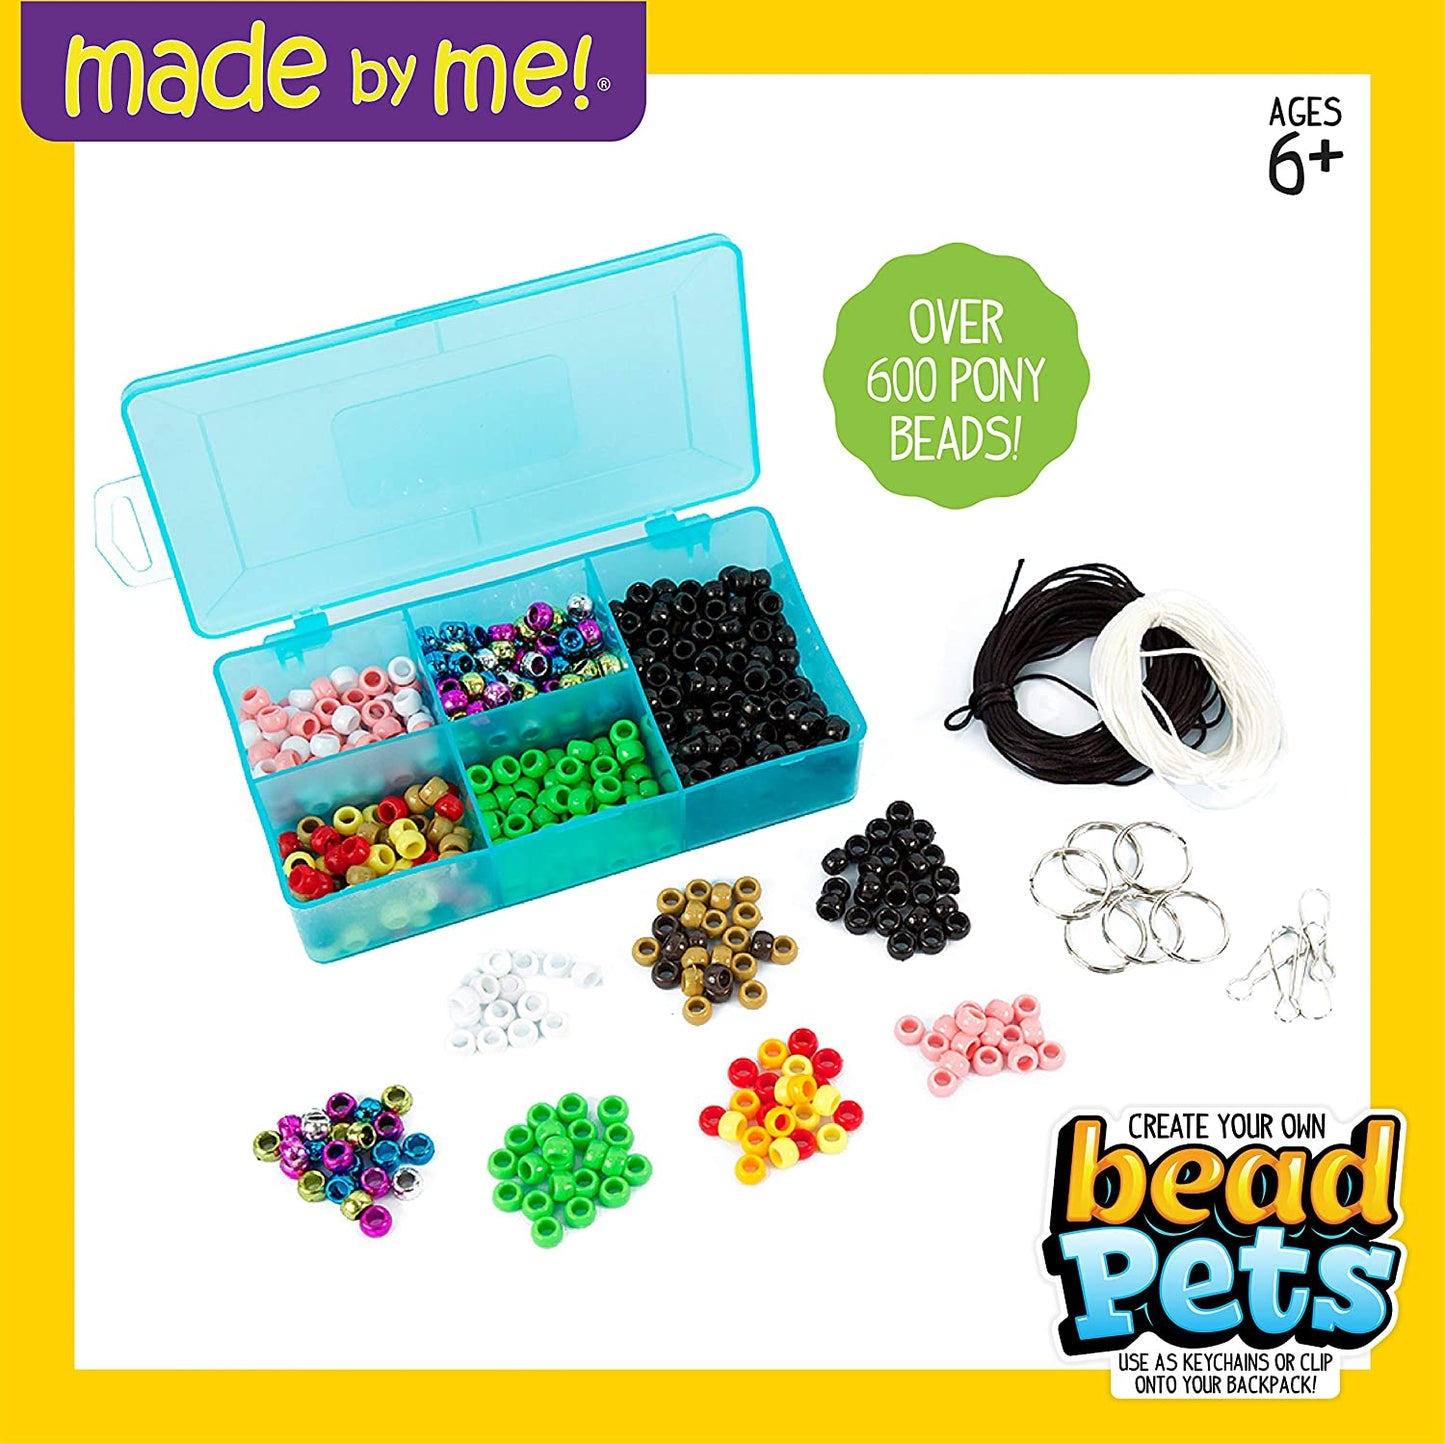 Create Your Own Bead Pets